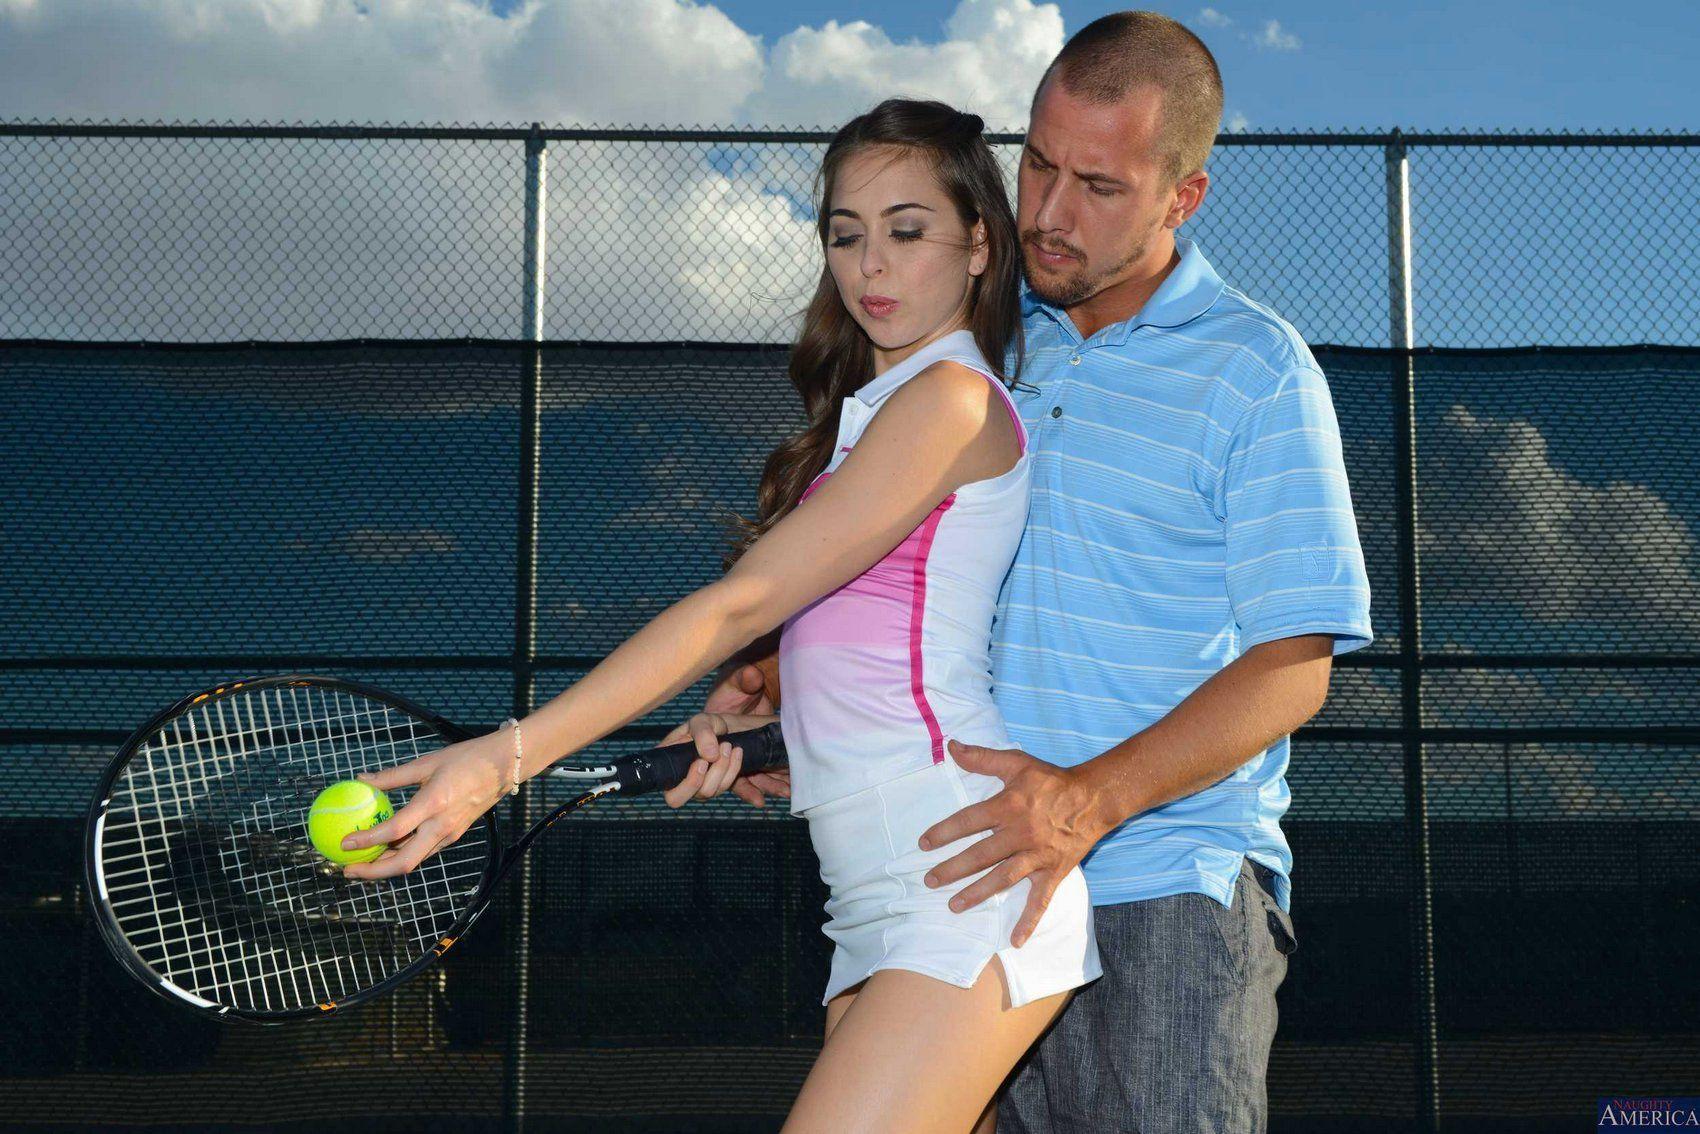 Having sex with tennis player